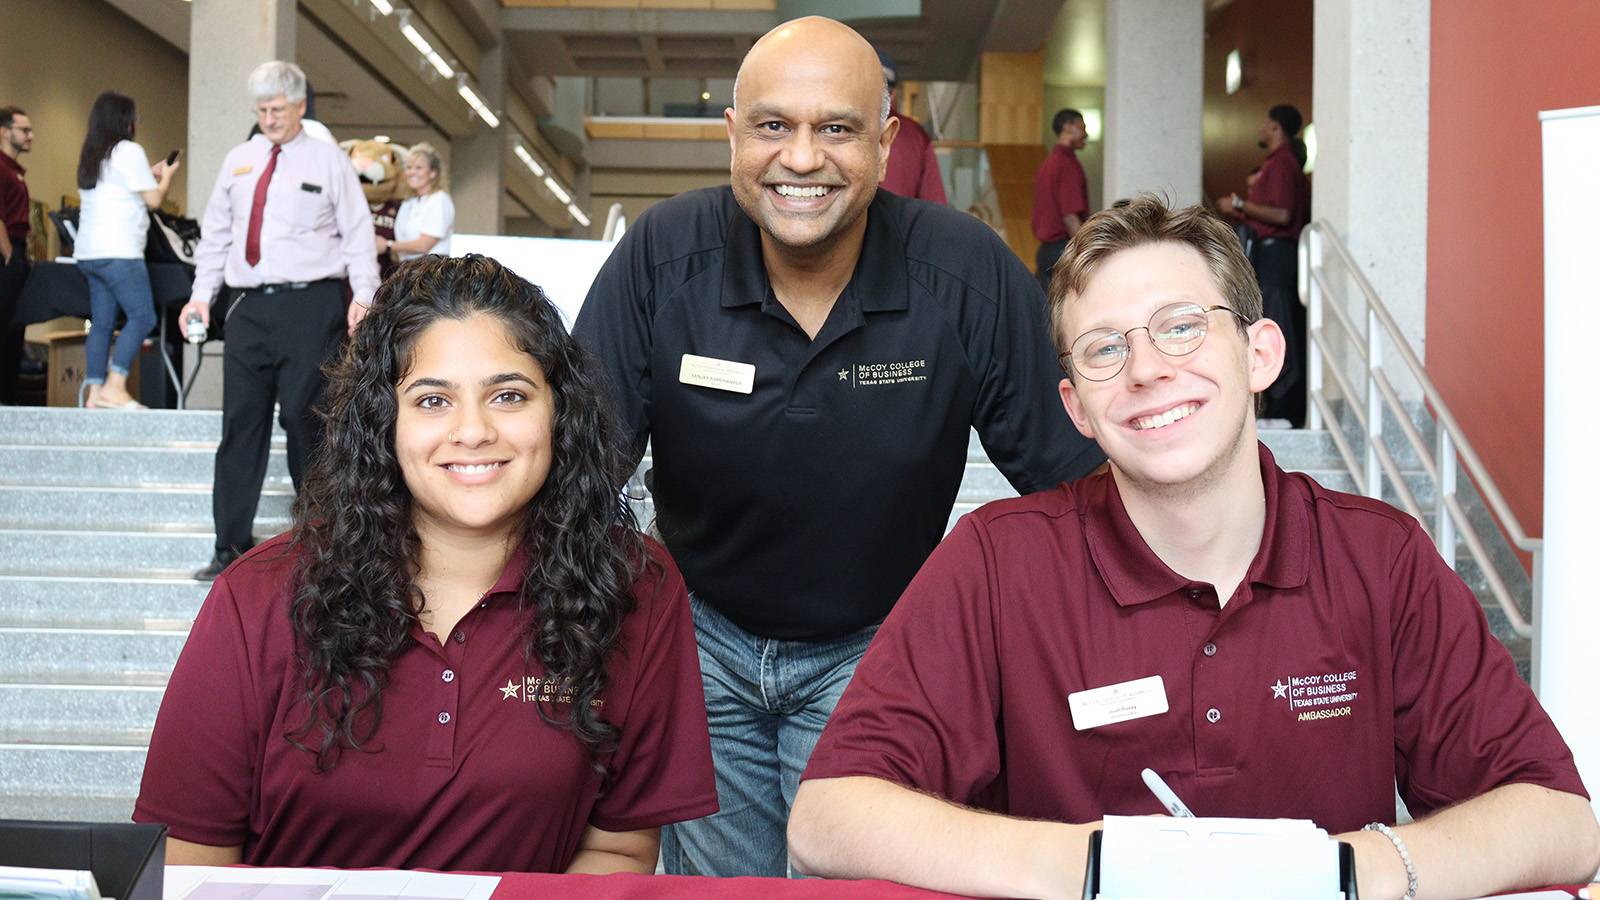 Two McCoy College Ambassadors at the check-in table for the Welcome Celebration with Dean Ramchander